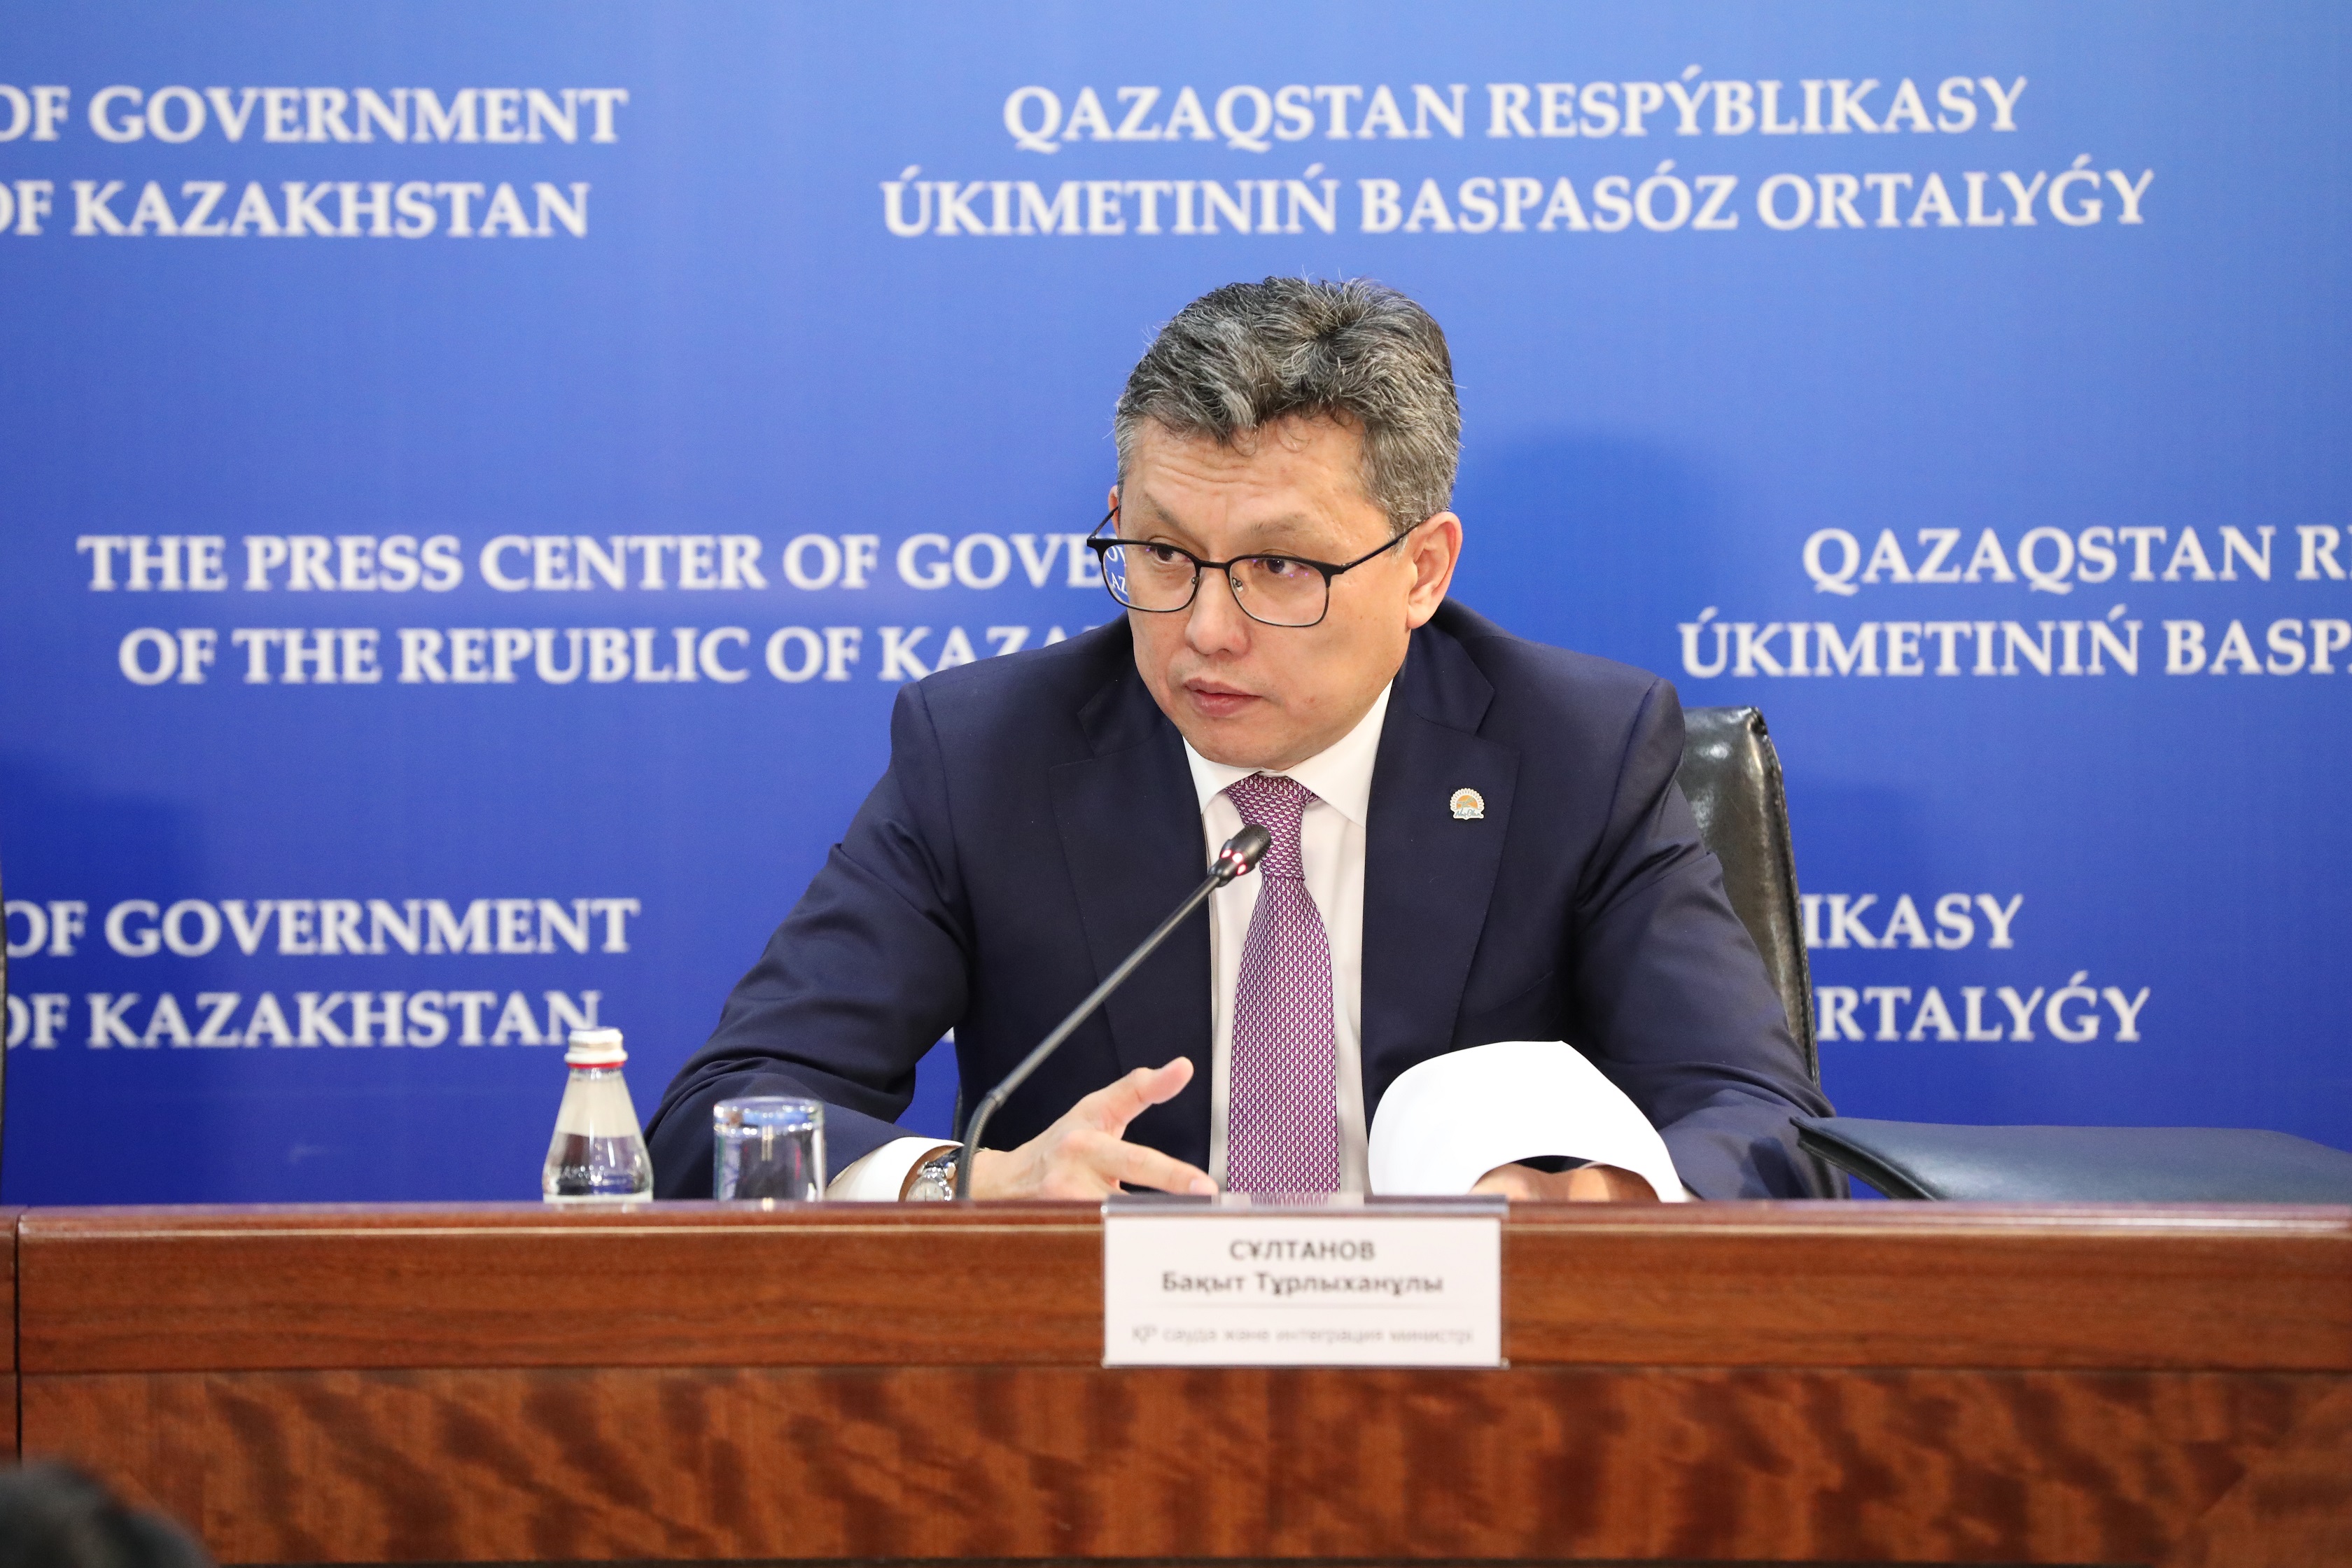 Wholesale markets to be created in Kazakhstan based on example of Spain and France